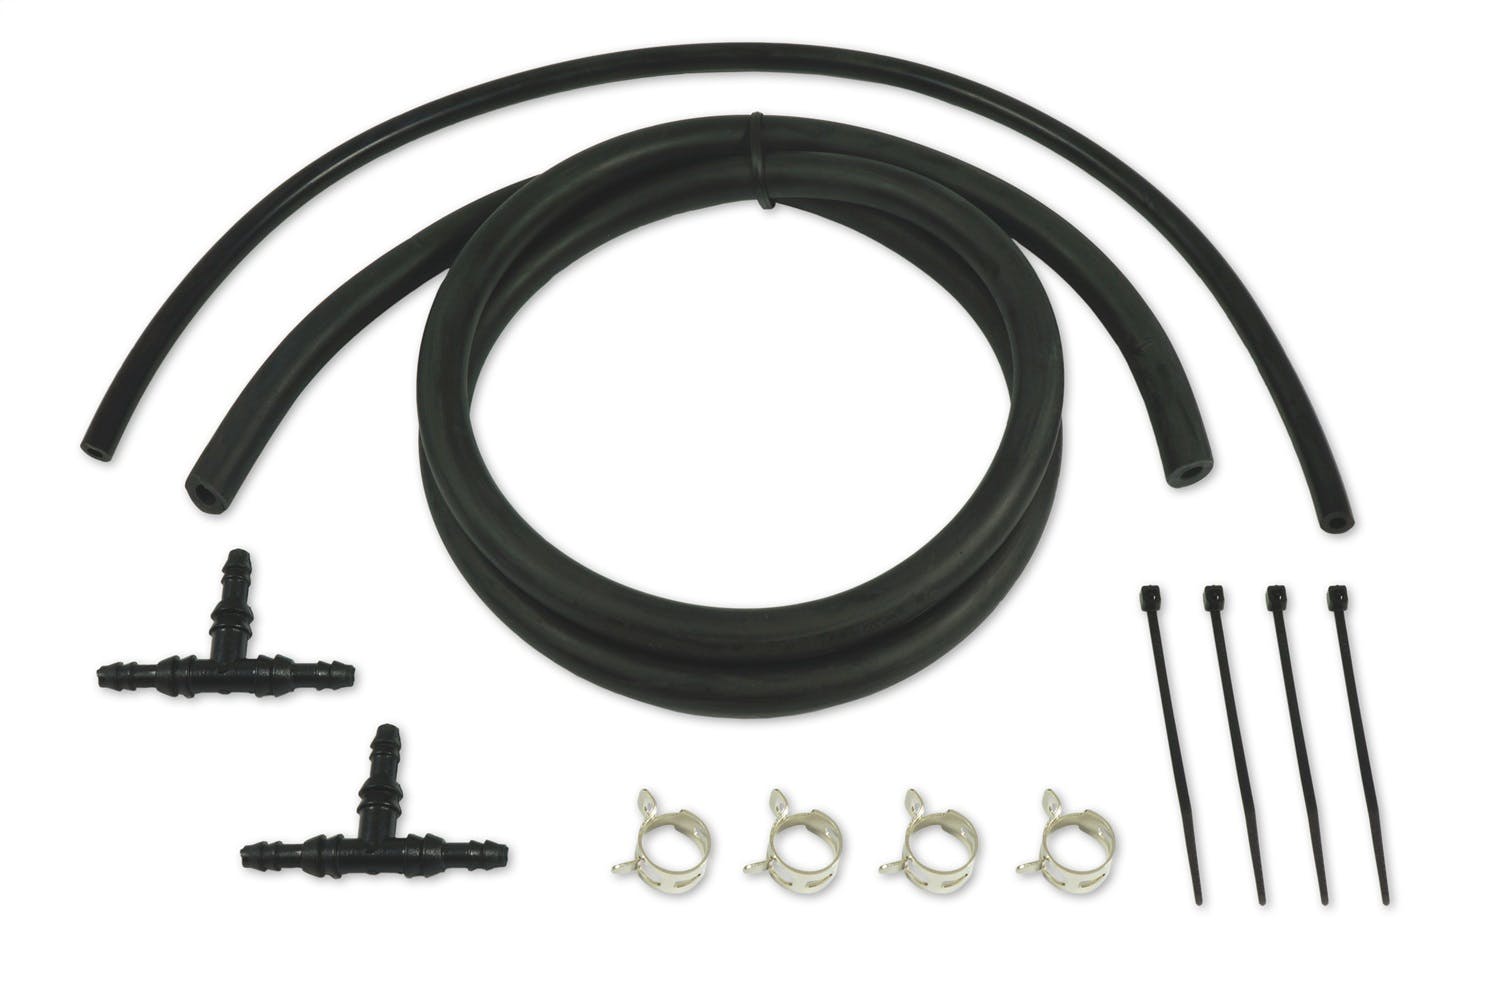 Innovate Motorsports 3885 Vacuum Hose, T-Fitting, and Clamp Kit (for most boost controllers)